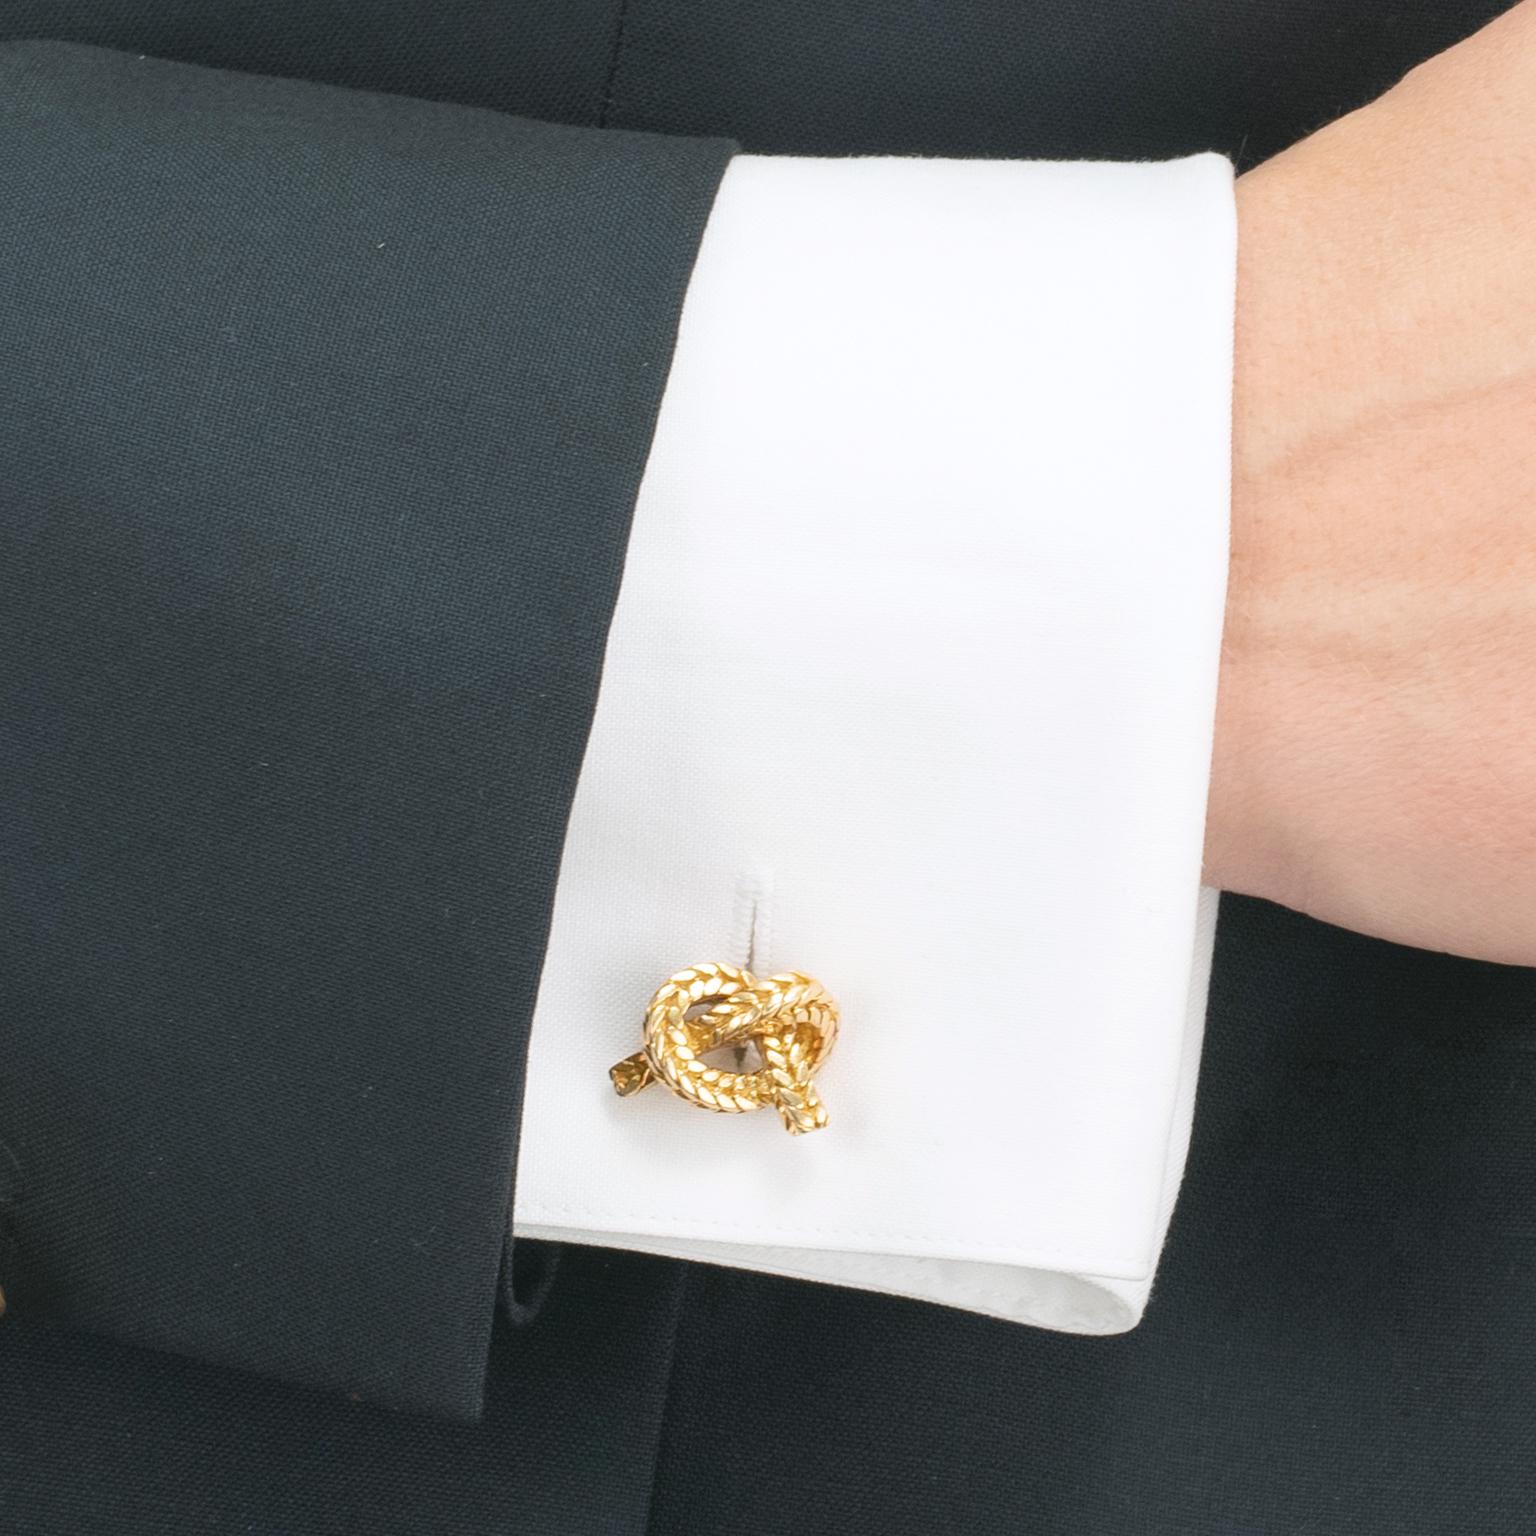 Circa 1970s, Hermes, French.  Redolent of their penchant for all things nautical, these knot motif cufflinks are iconic Hermes at their most stylish. Beautifully made, they are in excellent condition. 
	
Remark: “Cufflinks telegraph personal style.”